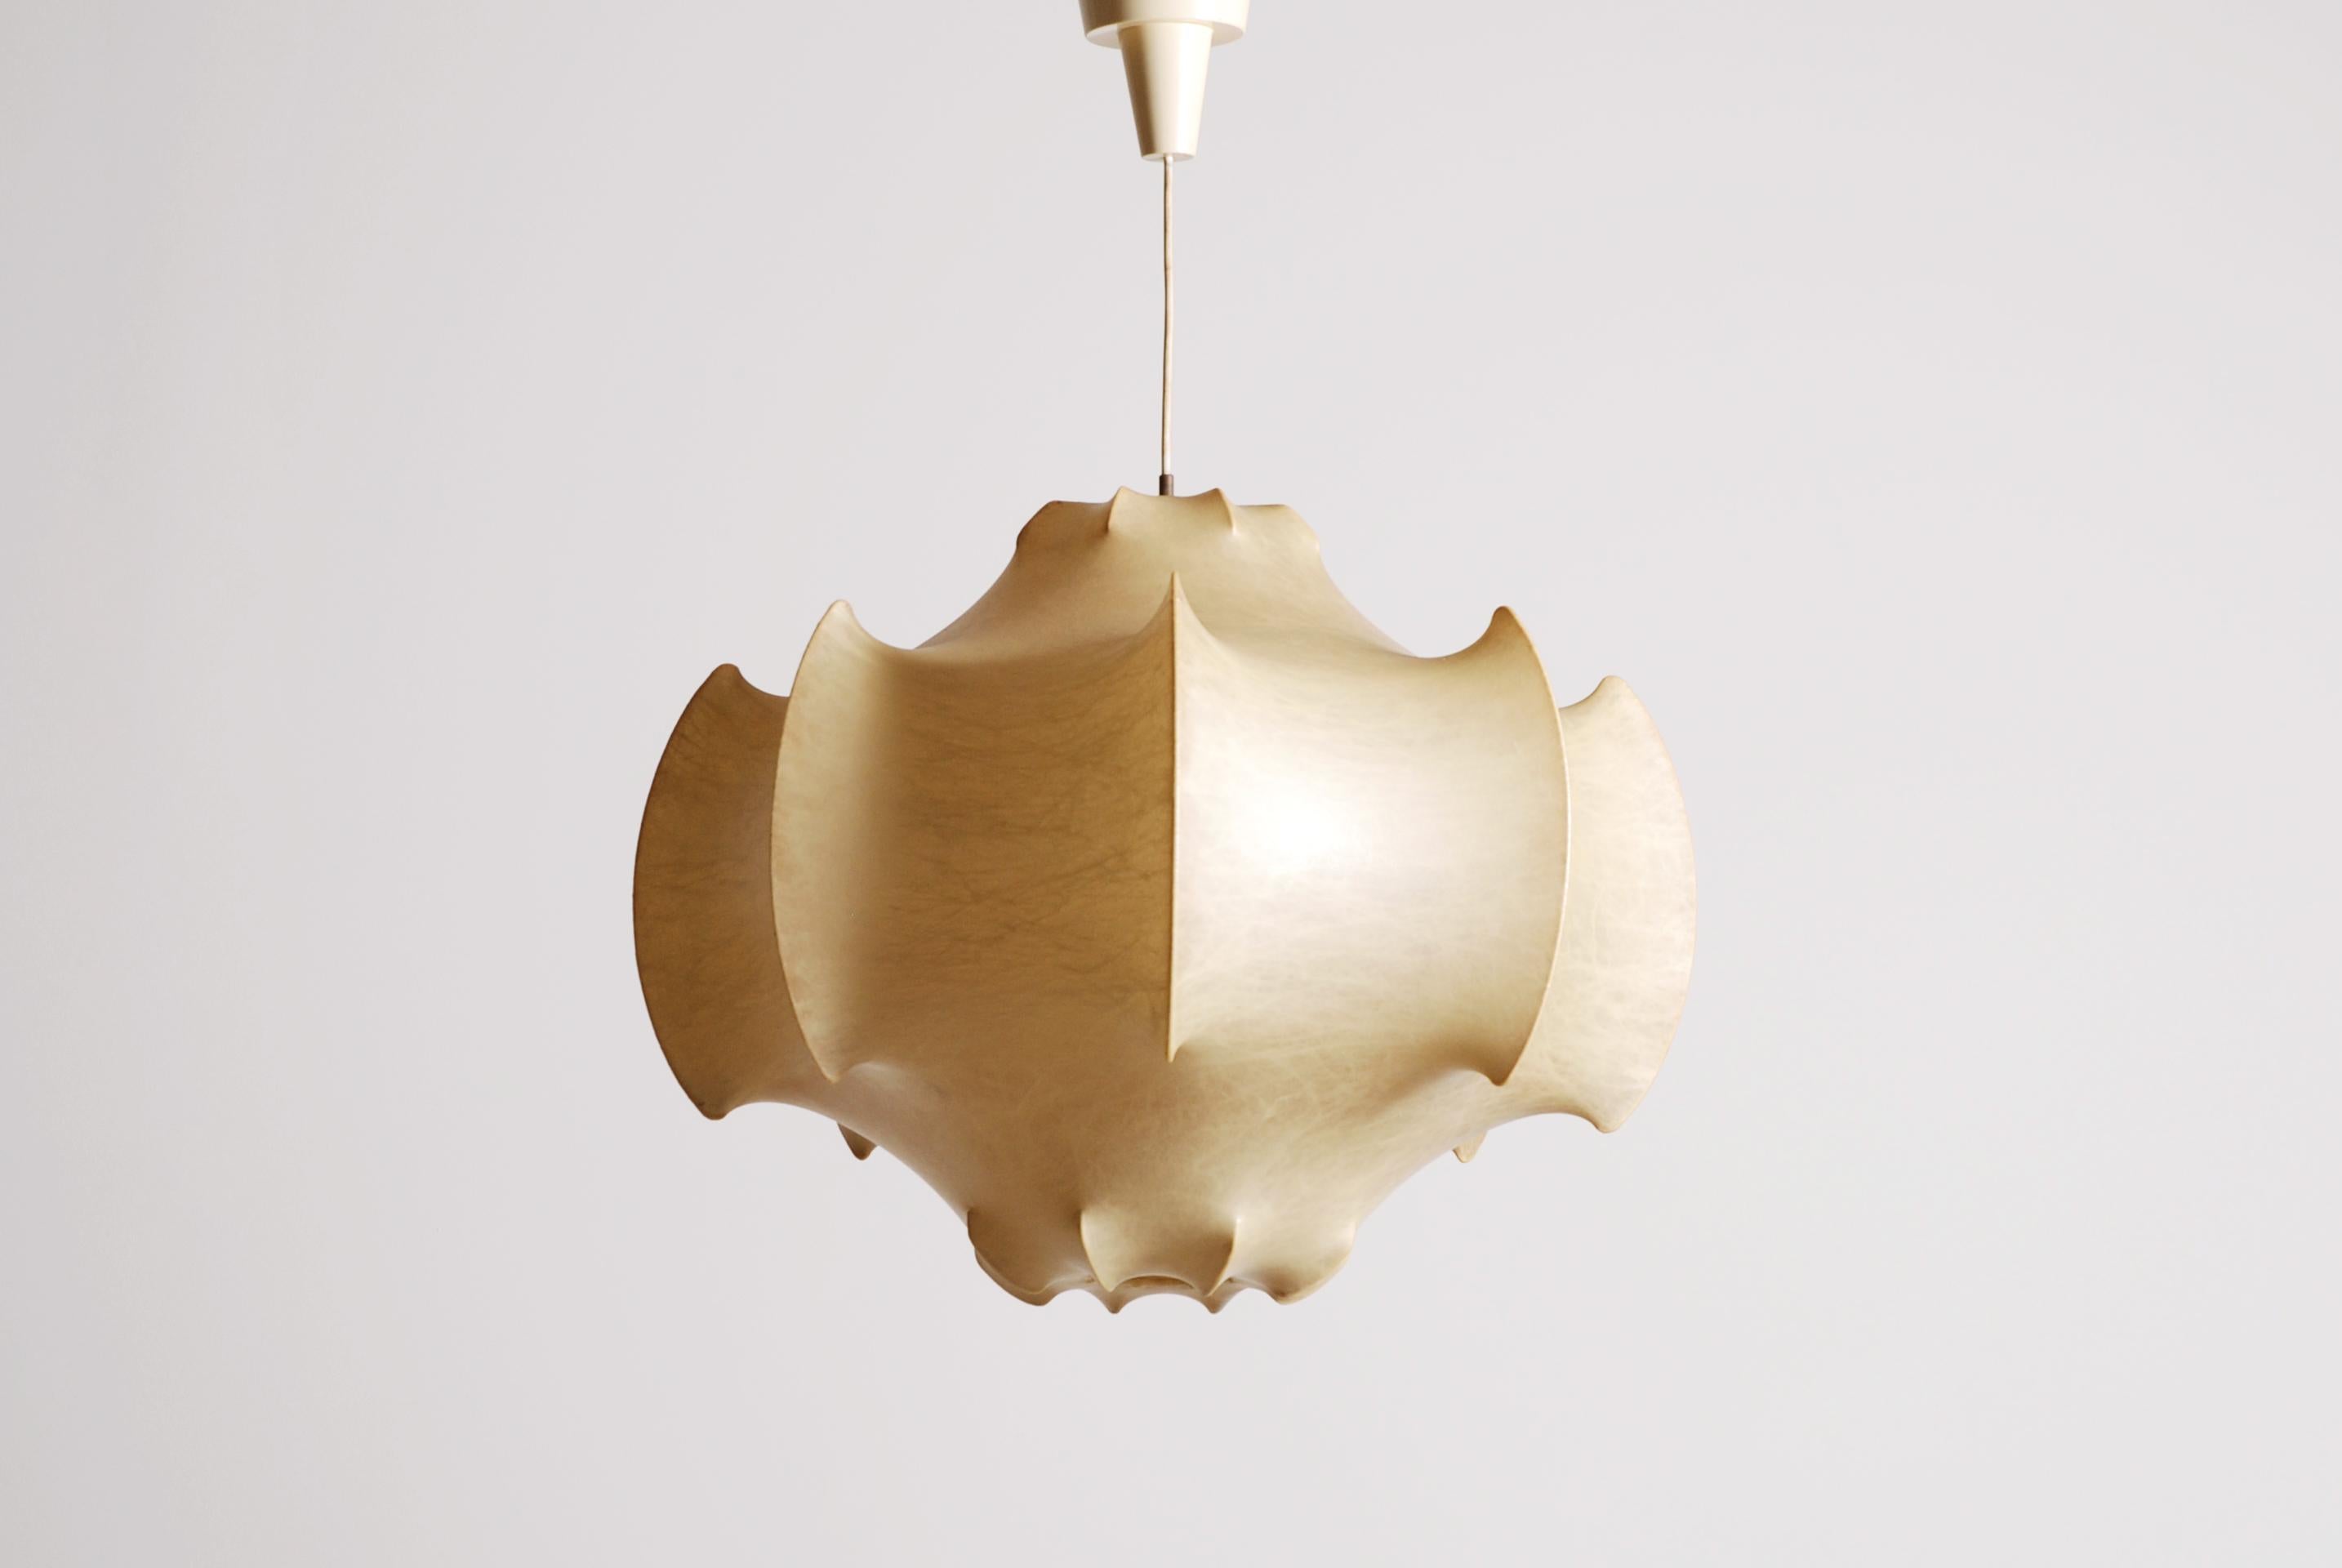 Large 26,4 inches Suspension lamp designed by Achille and Pier Giacomo Castiglioni. This iconic 